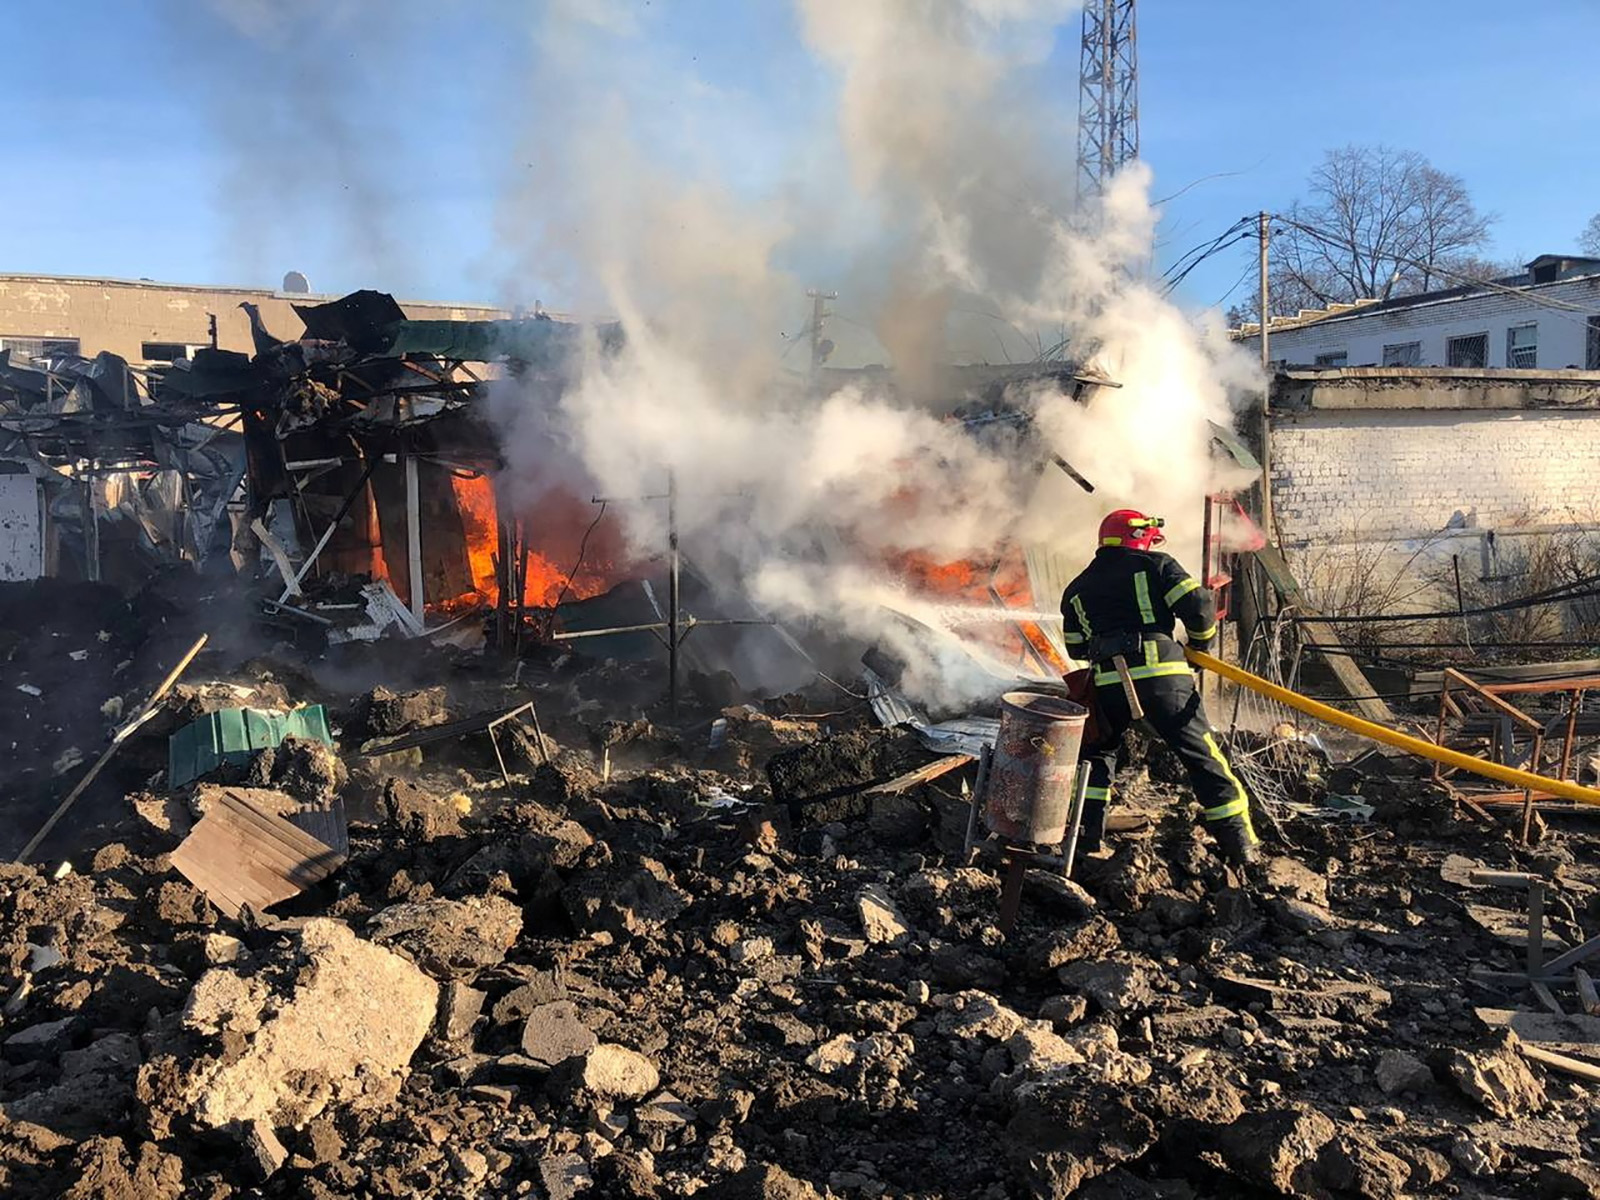 A firefighter works at a site of a market hit by Russian missiles in the town of Shevchenkove, Kharkiv region, Ukraine, on January 9.